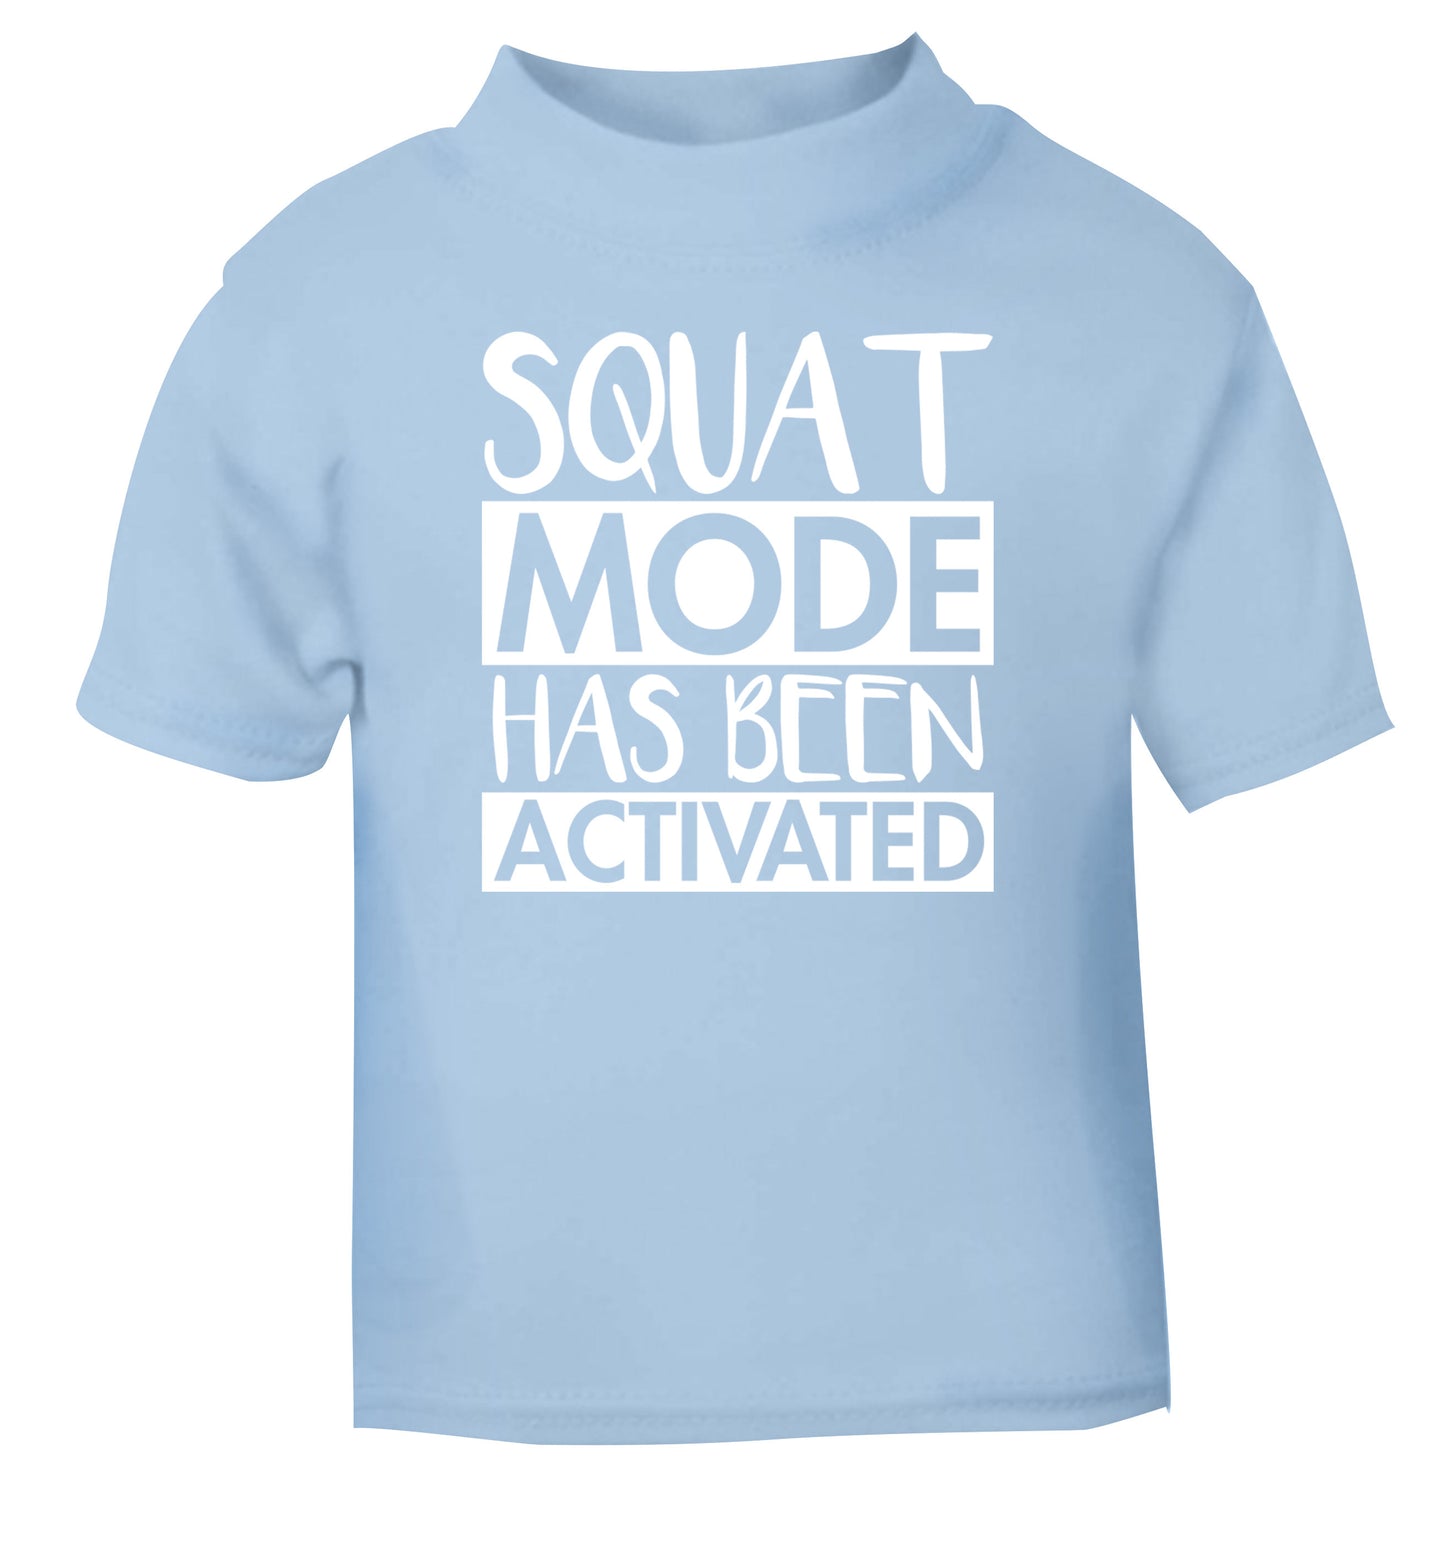 Squat mode activated light blue Baby Toddler Tshirt 2 Years